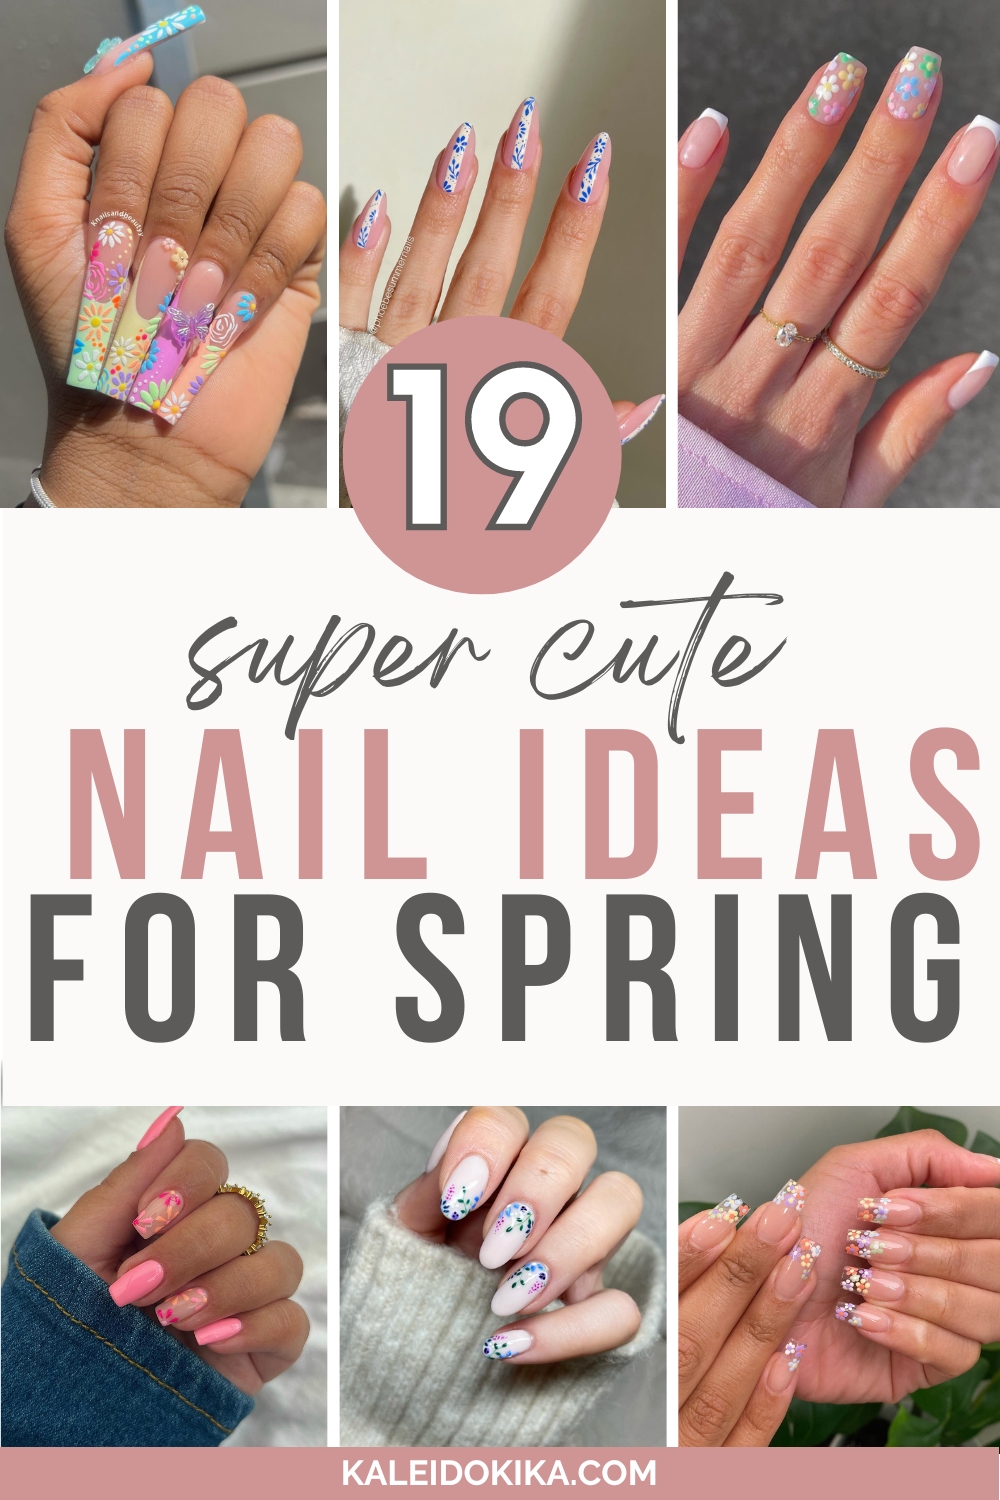 Image showing 19 cute nail ideas for spring